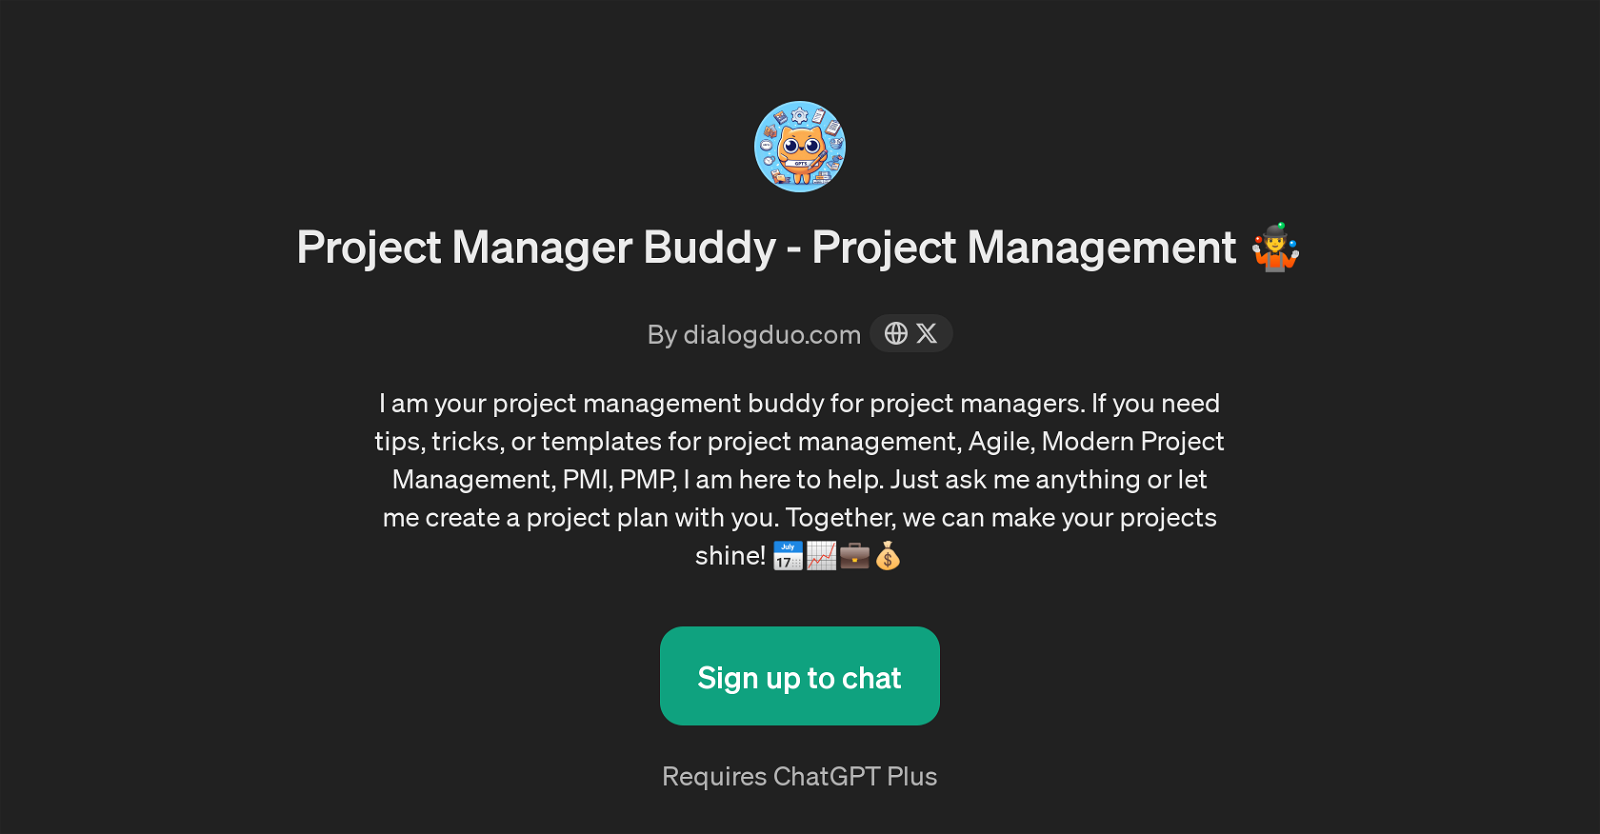 Project Manager Buddy website